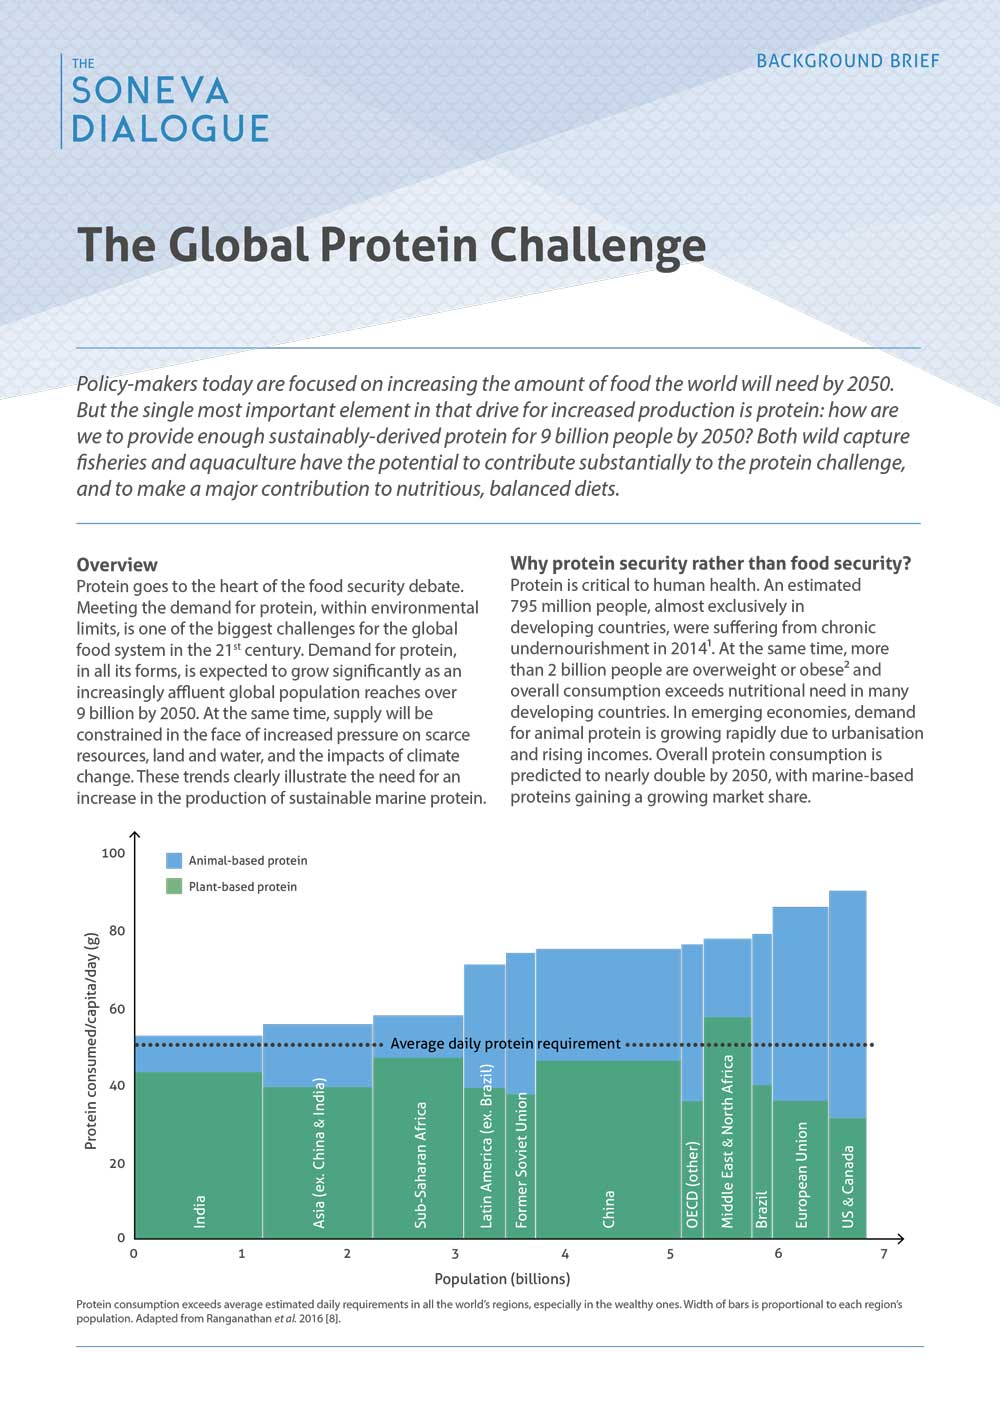 The Global Protein Challenge